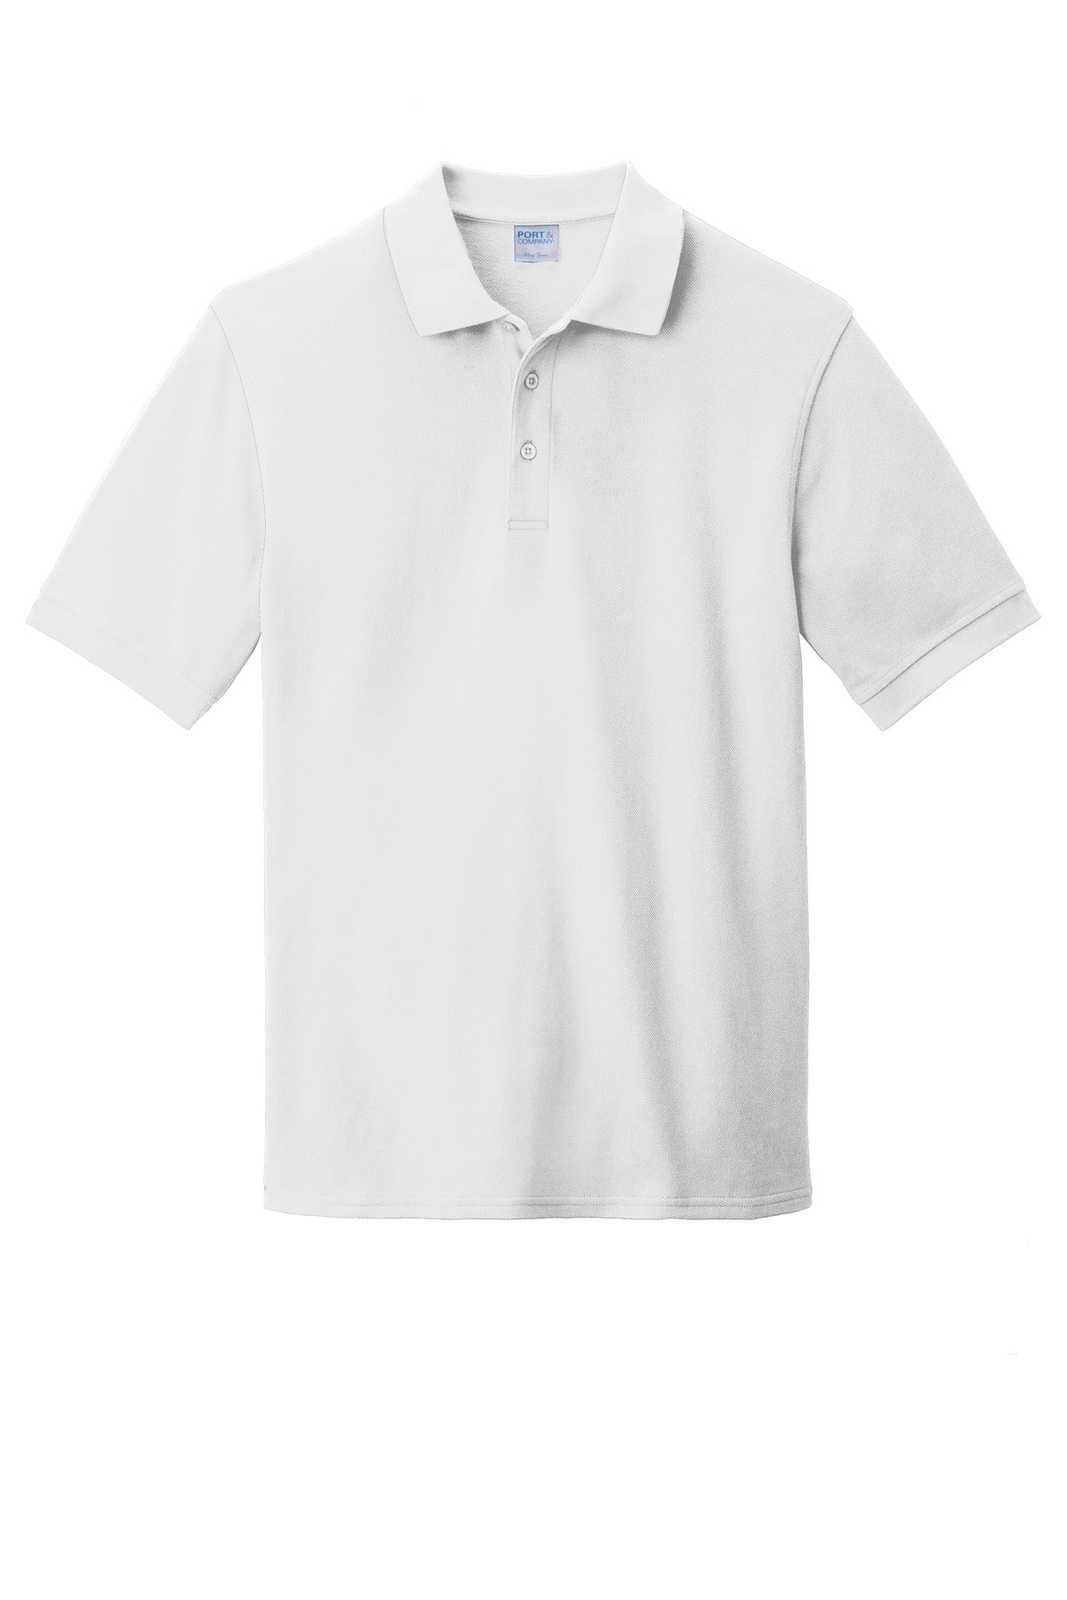 Port &amp; Company KP1500 Combed Ring Spun Pique Polo - White - HIT a Double - 5